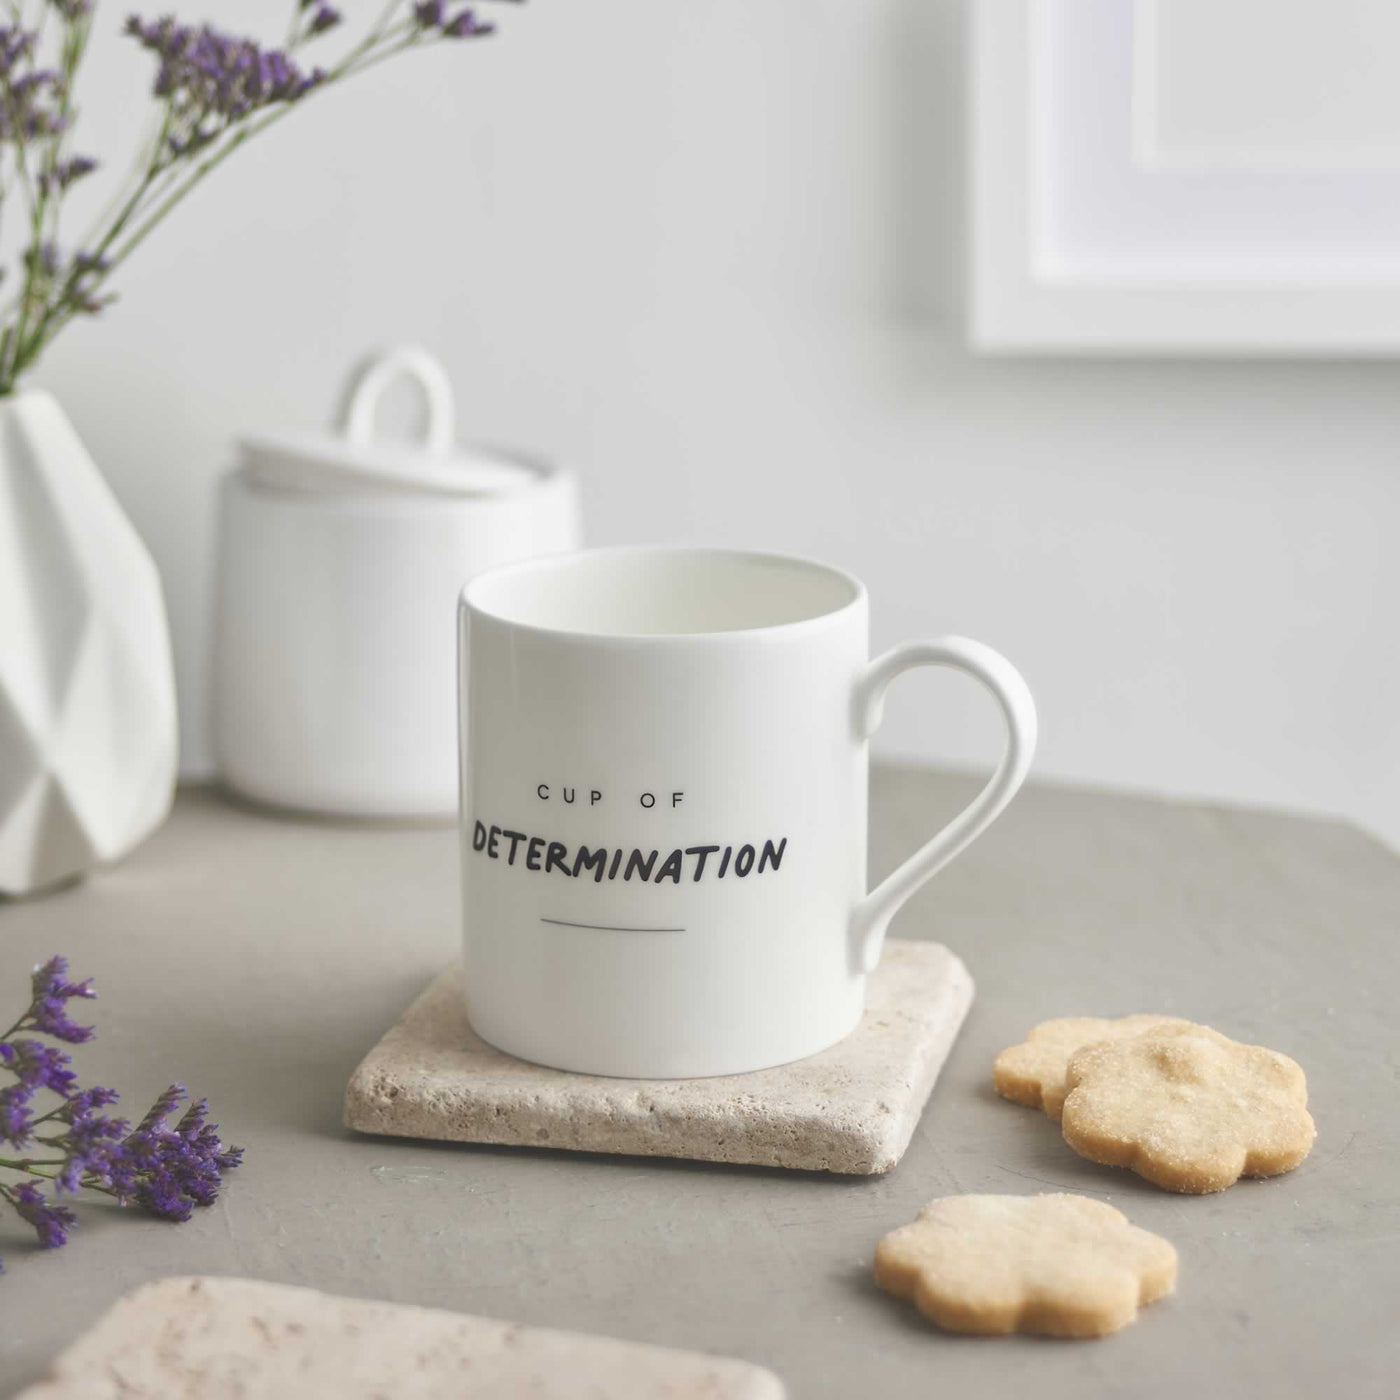 Cup of Determination Mug with biscuits